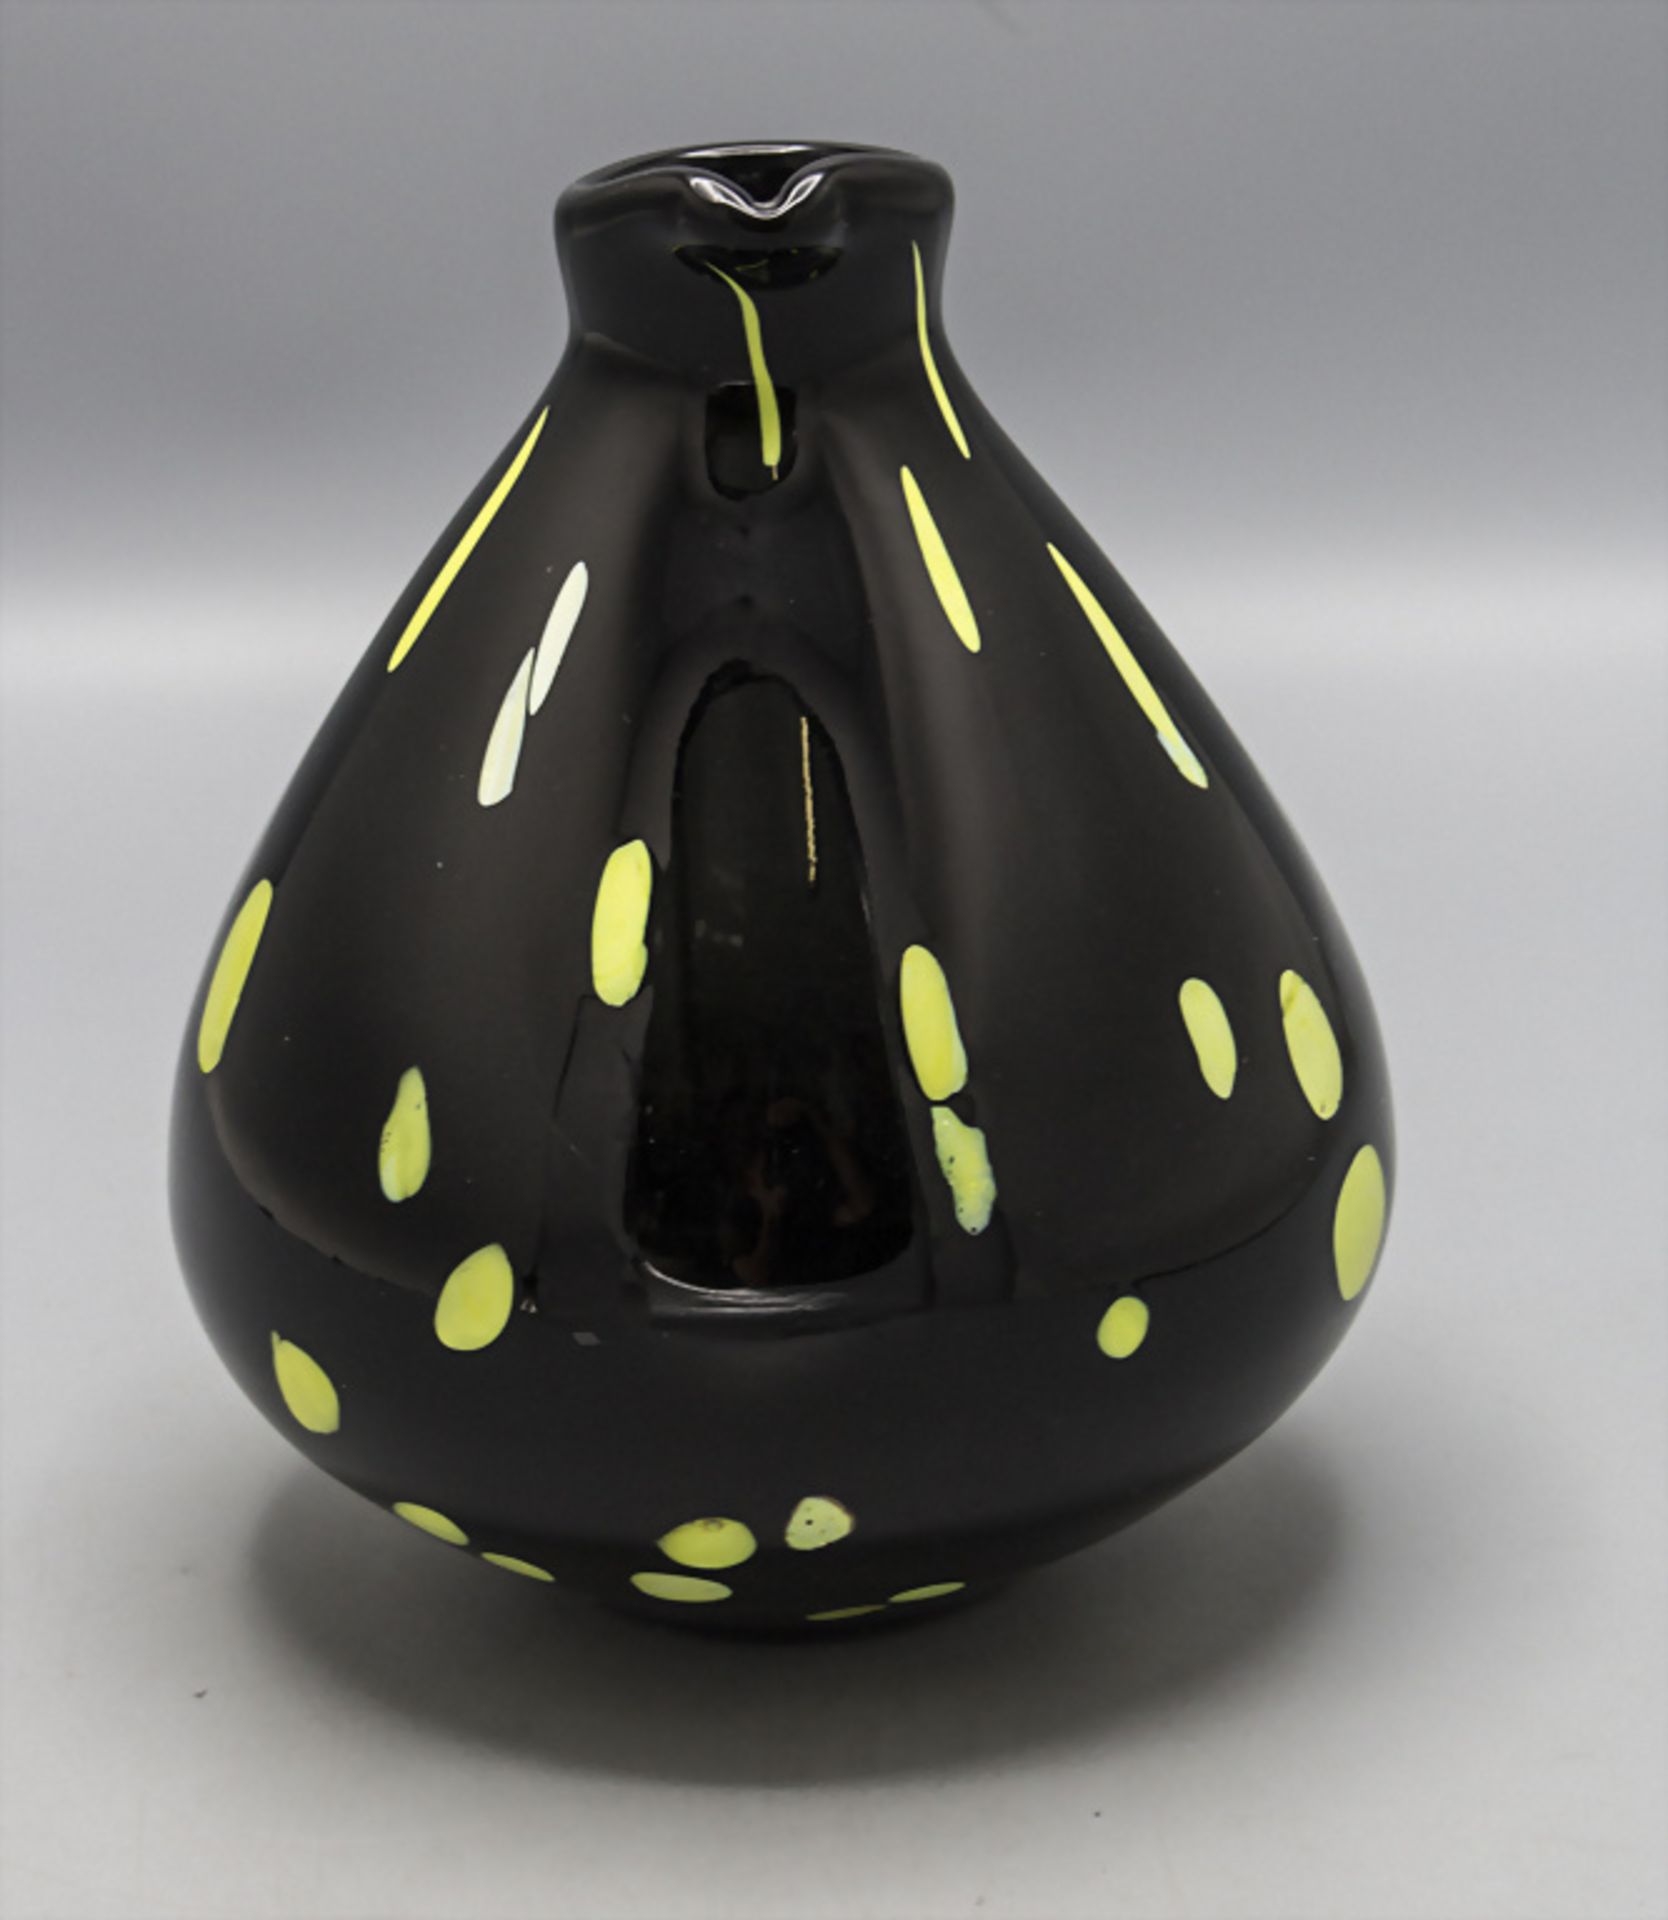 Henkelvase / A glass vase with handles, Murano, 50/60er Jahre - Image 2 of 4